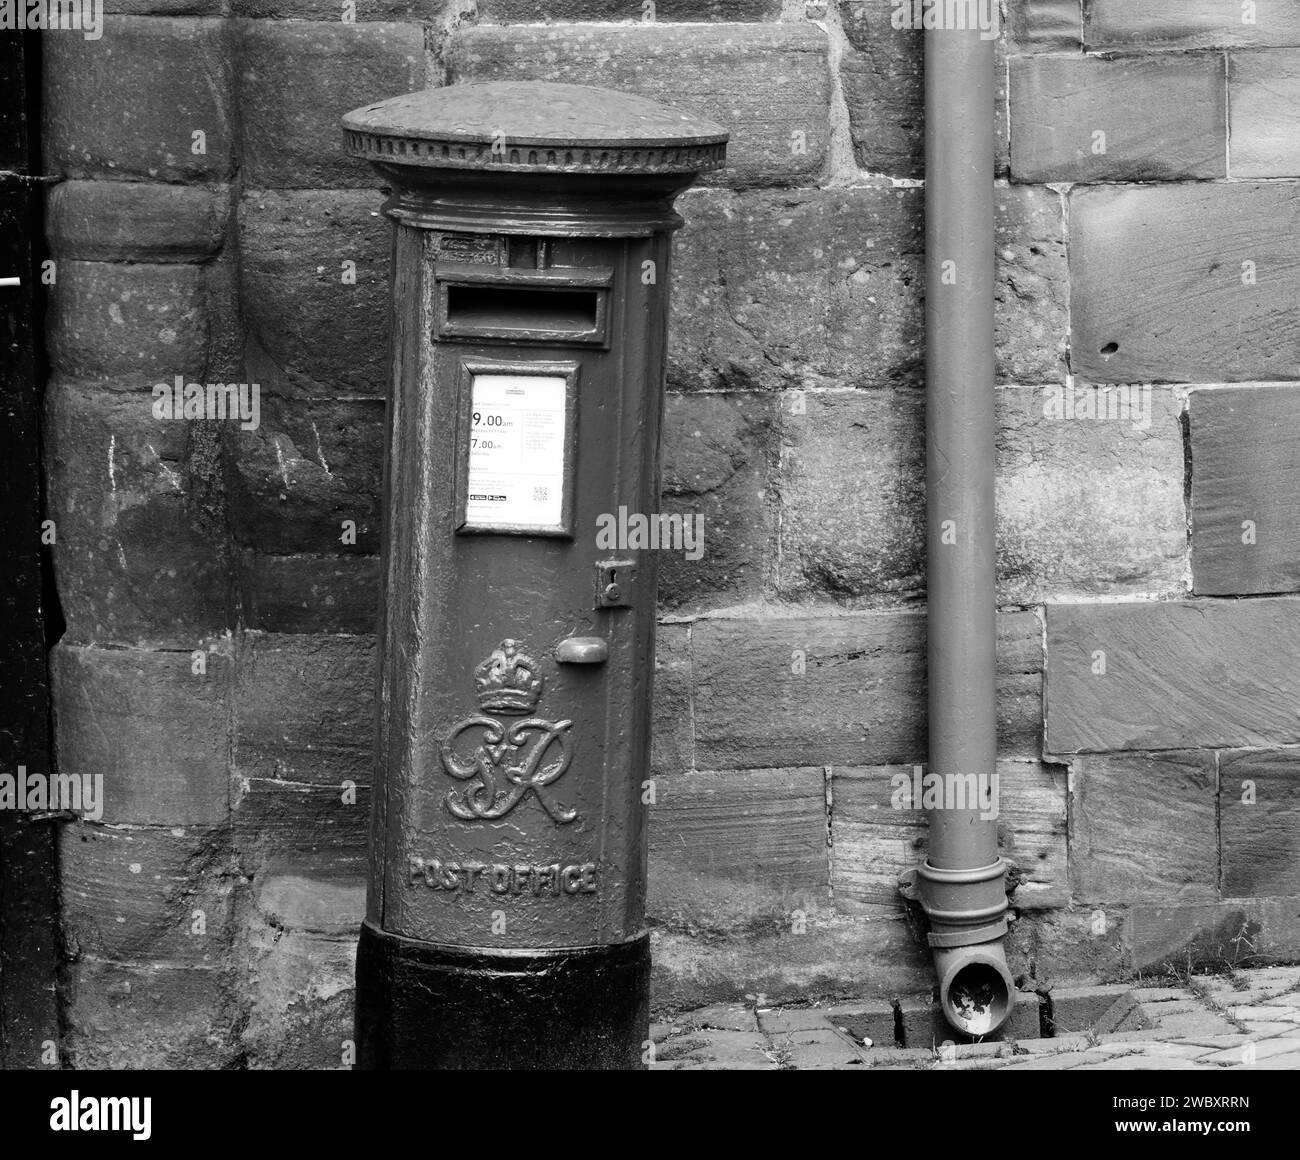 Black and white image of a post box, which is leaning to the side, against a stone wall with a drainpipe. Stock Photo